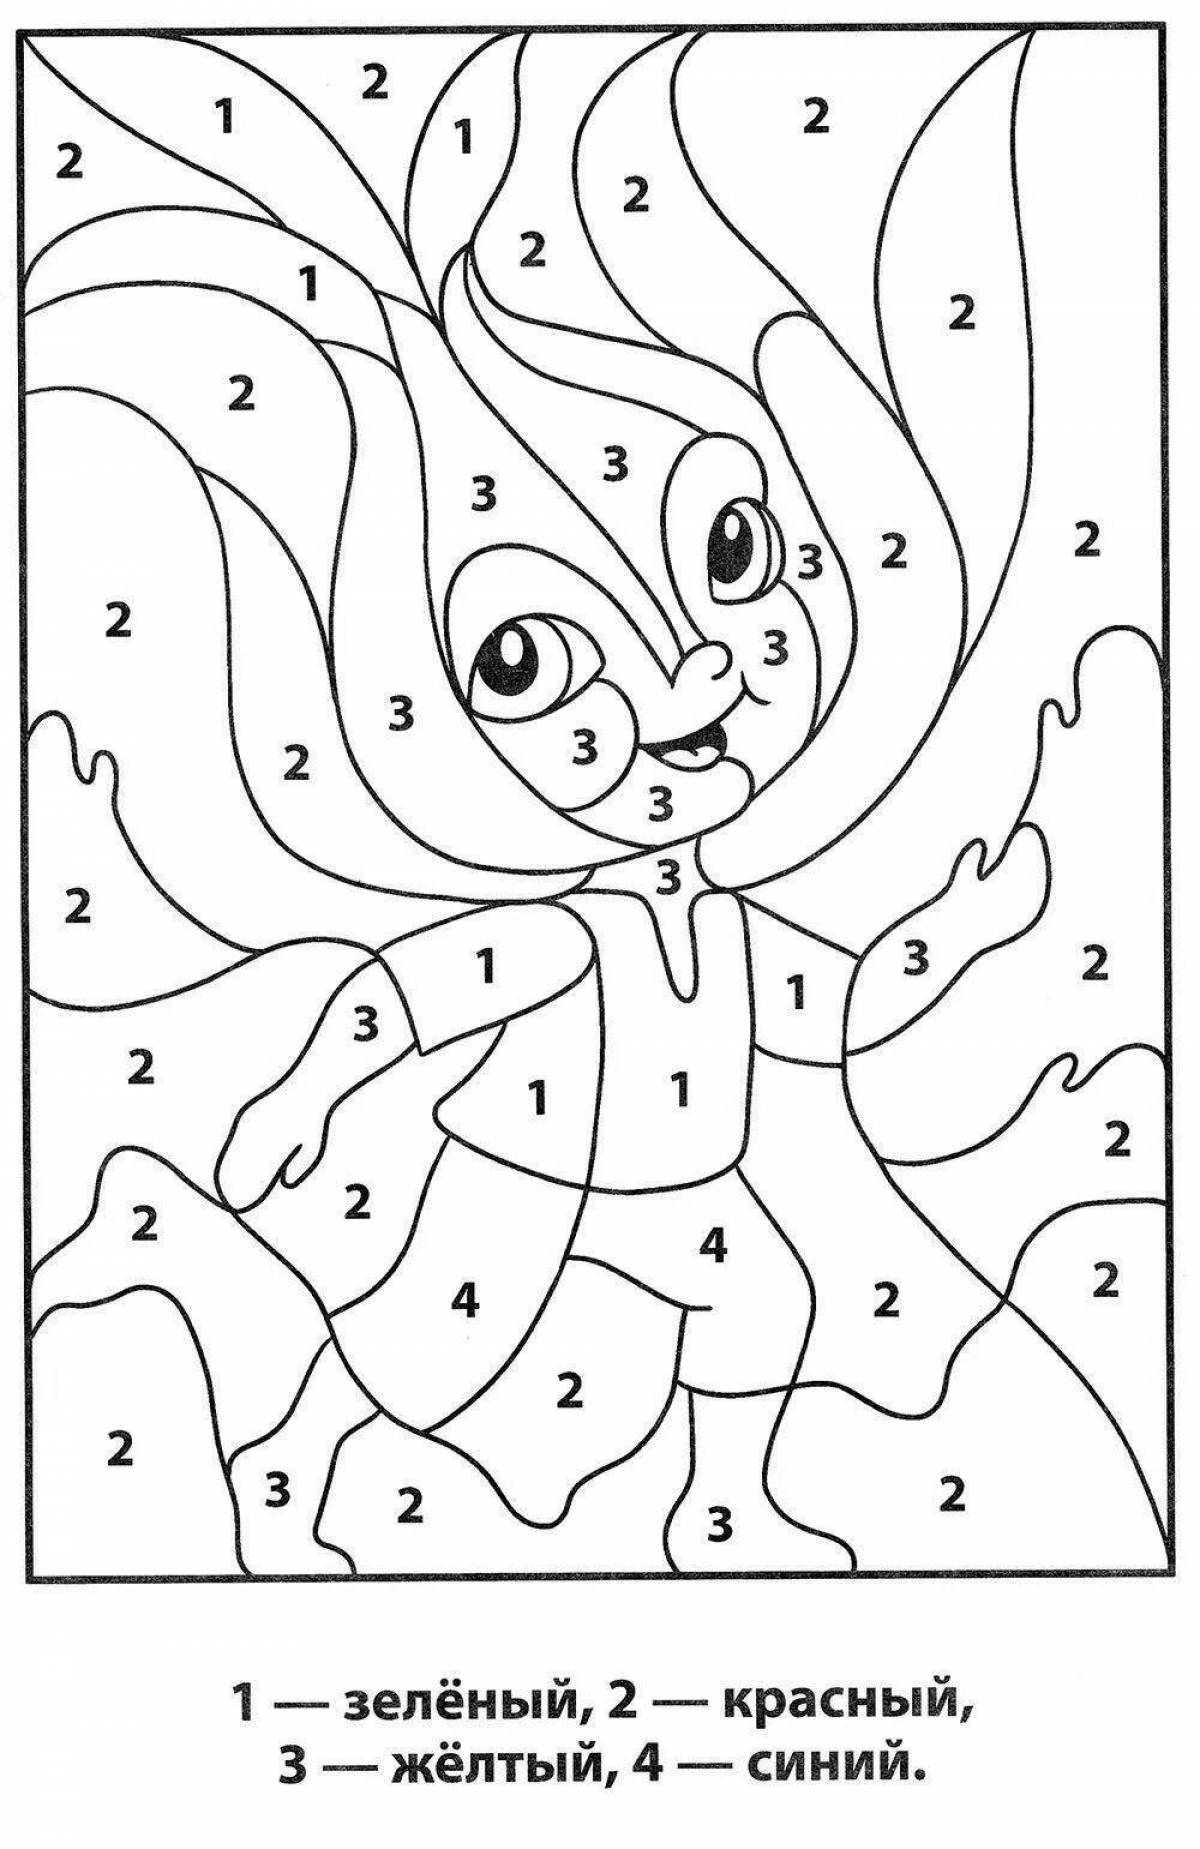 Fun coloring book with small numbers